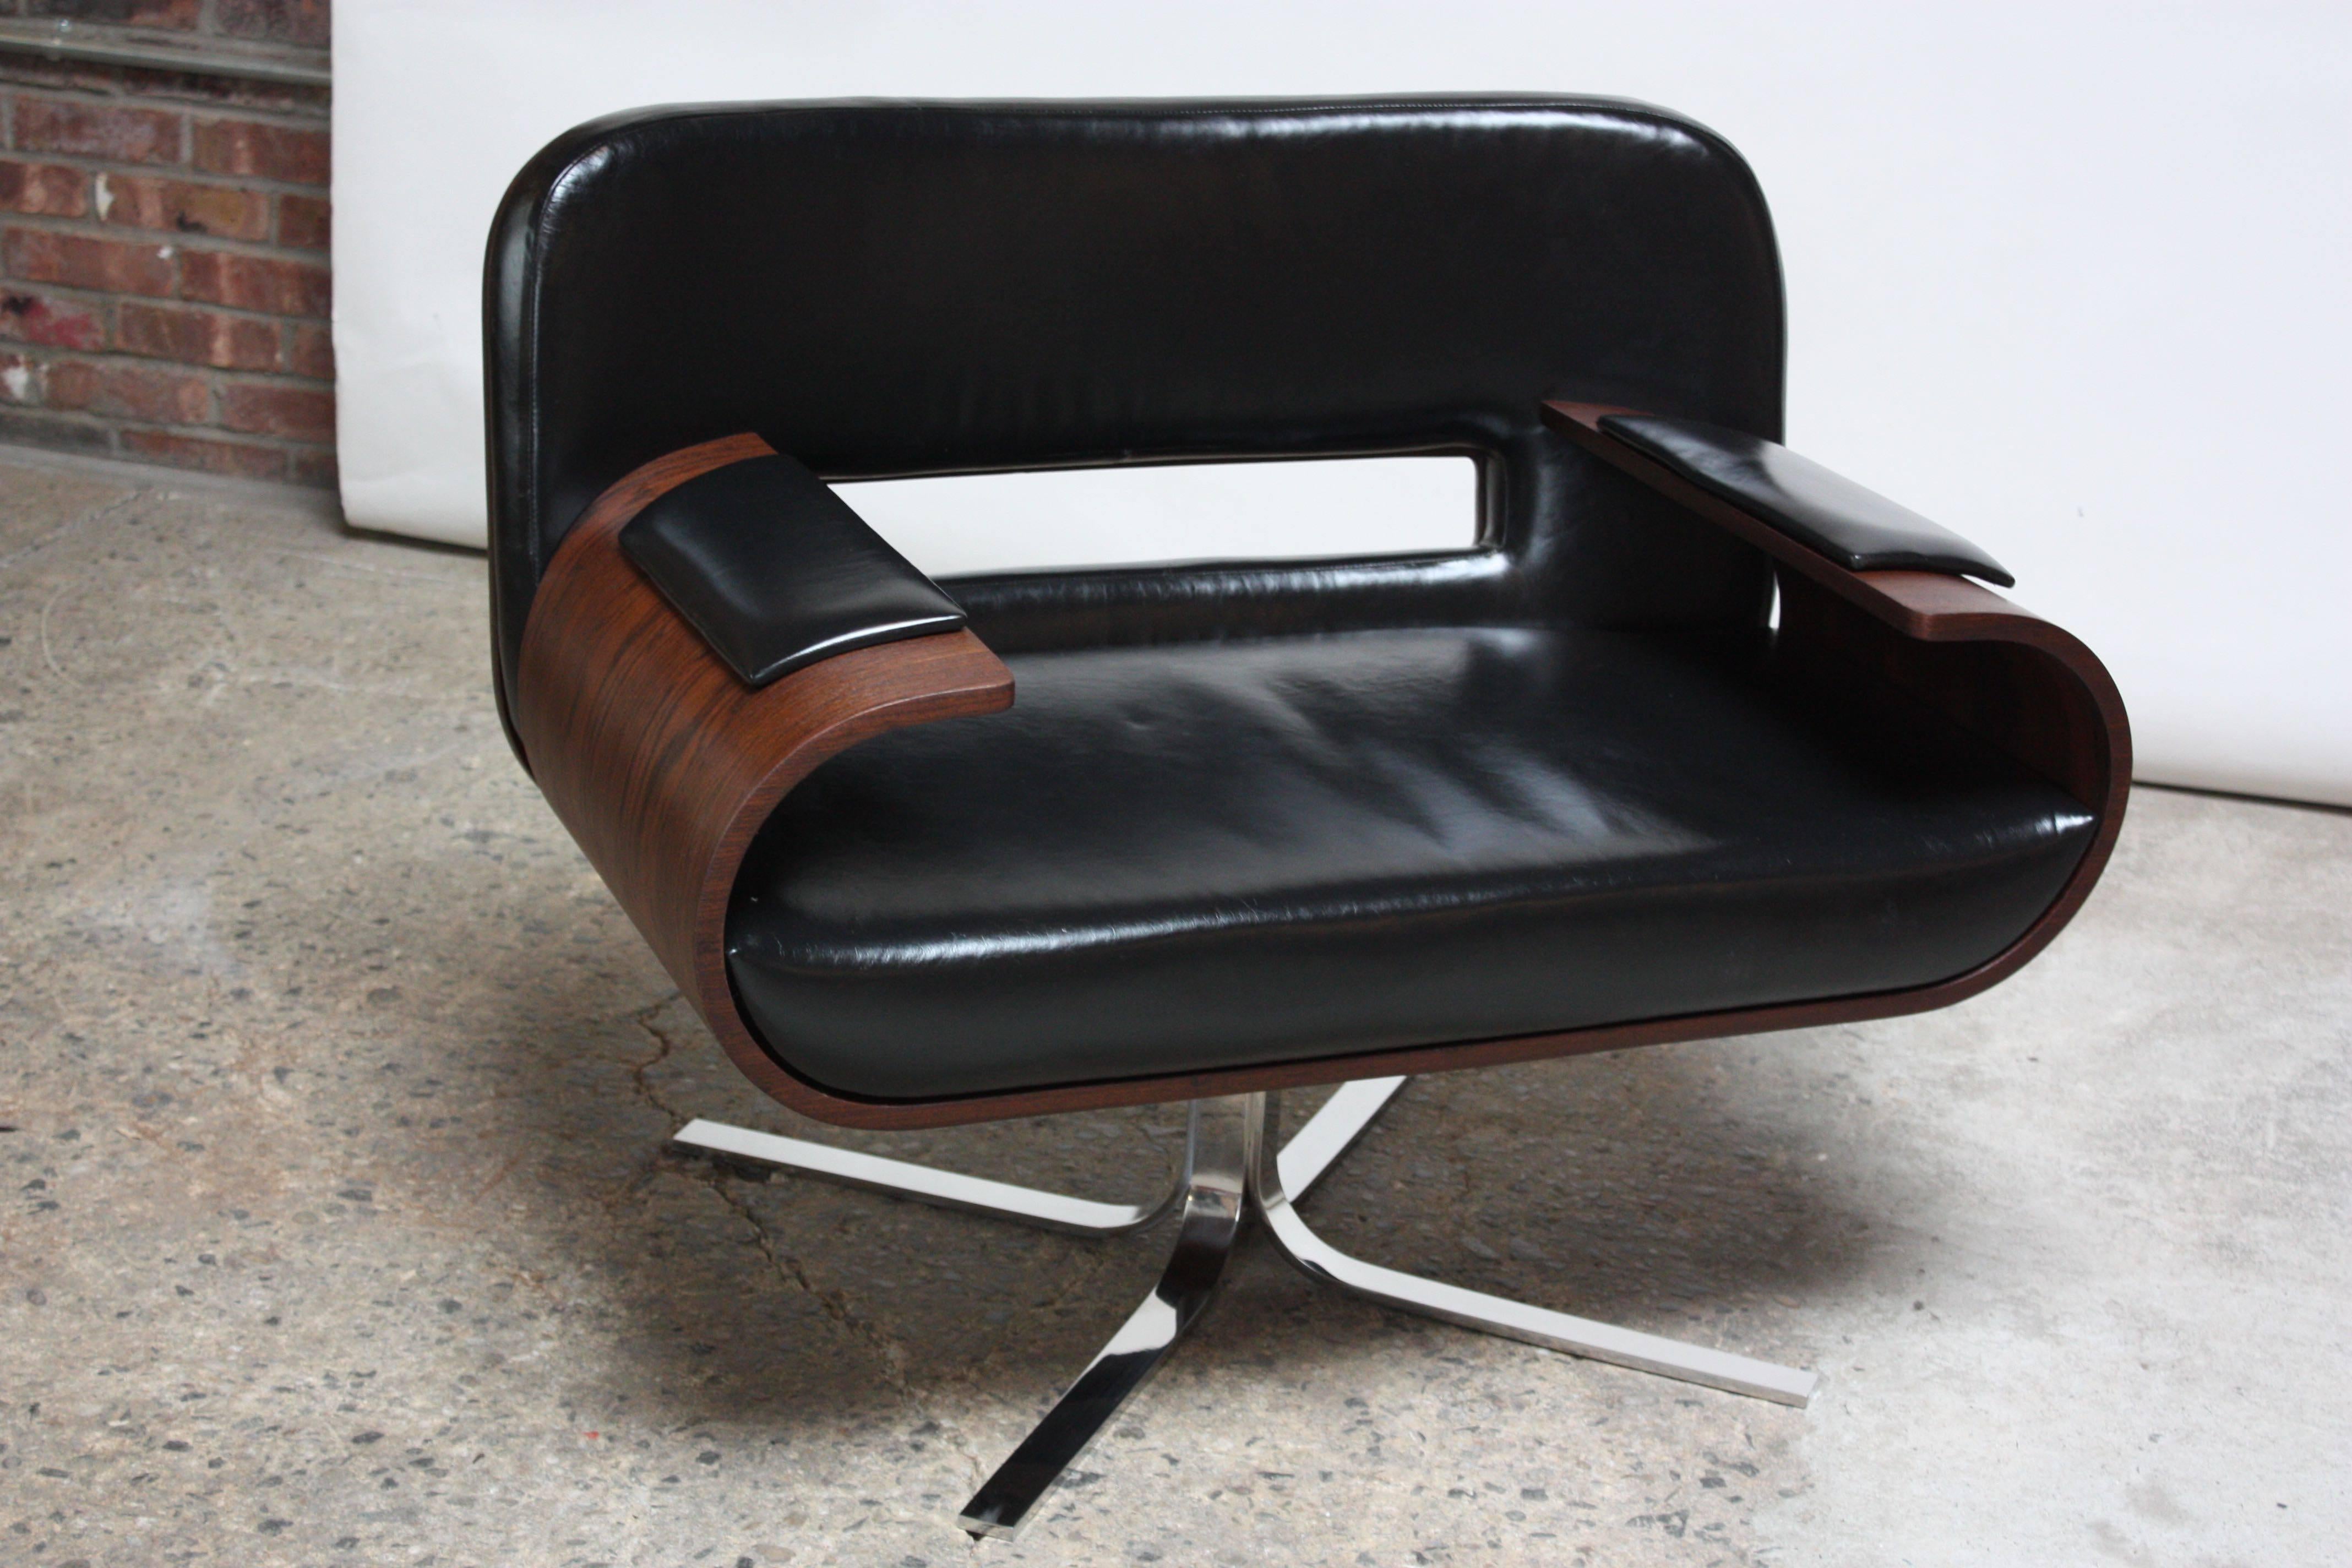 Rare Jorge Zalszupin Brazilian modern armchair composed of bent jacaranda arms and back with black leather seat, back and hand rests. Supported by a stainless steel swivel base. Features a wide seat for added comfort. A true statement piece with a